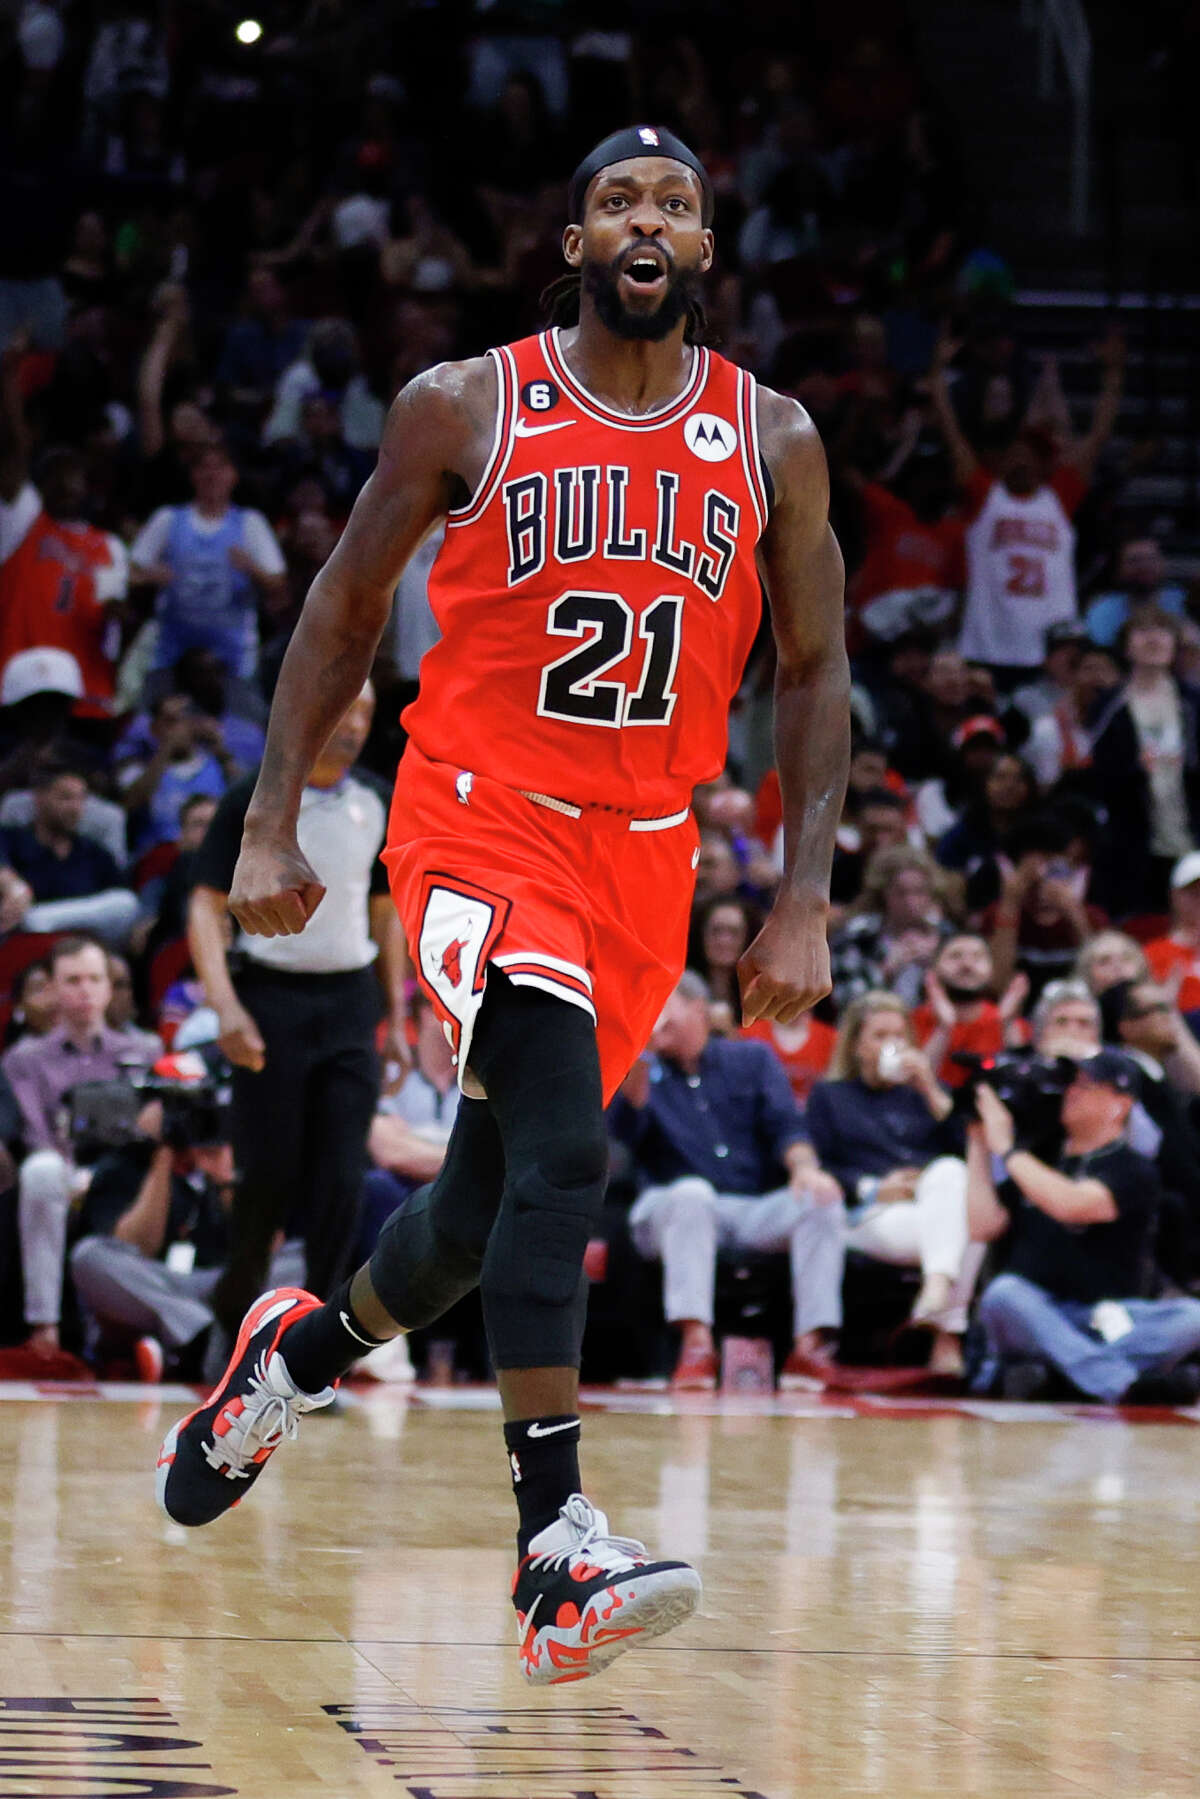 HOUSTON, TEXAS - MARCH 11: Patrick Beverley #21 of the Chicago Bulls reacts to hitting a three point basket against the Houston Rockets during the second half at Toyota Center on March 11, 2023 in Houston, Texas. NOTE TO USER: User expressly acknowledges and agrees that, by downloading and or using this photograph, User is consenting to the terms and conditions of the Getty Images License Agreement. (Photo by Carmen Mandato/Getty Images)